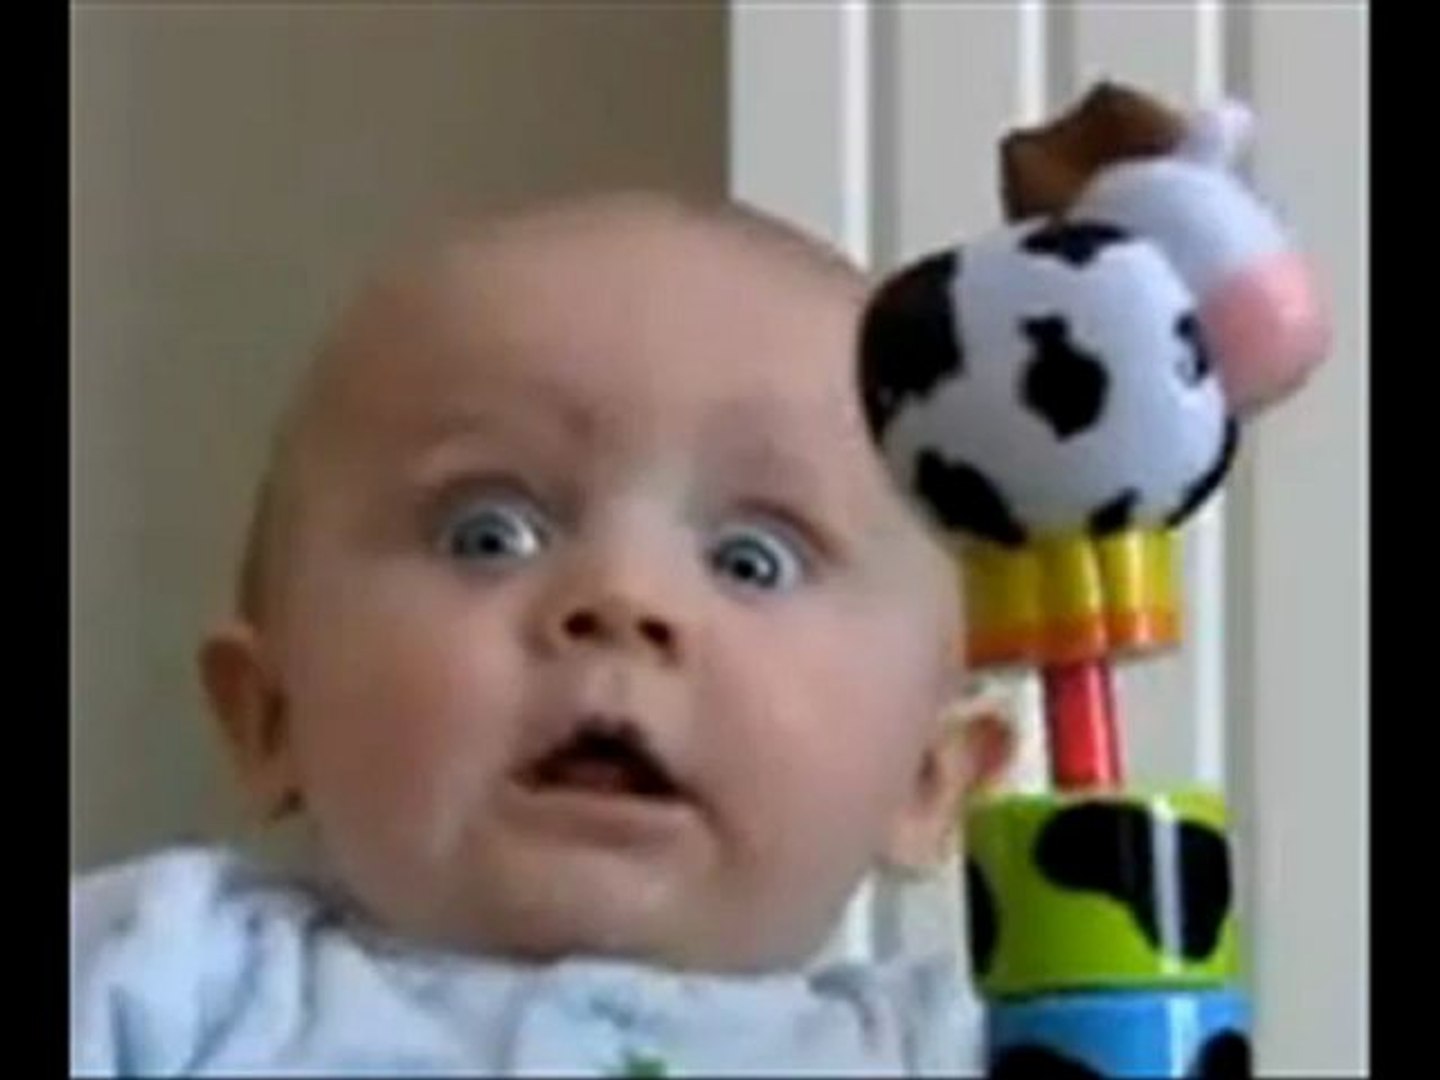 The Funniest videos of Children - Funny baby videos - Video Dailymotion